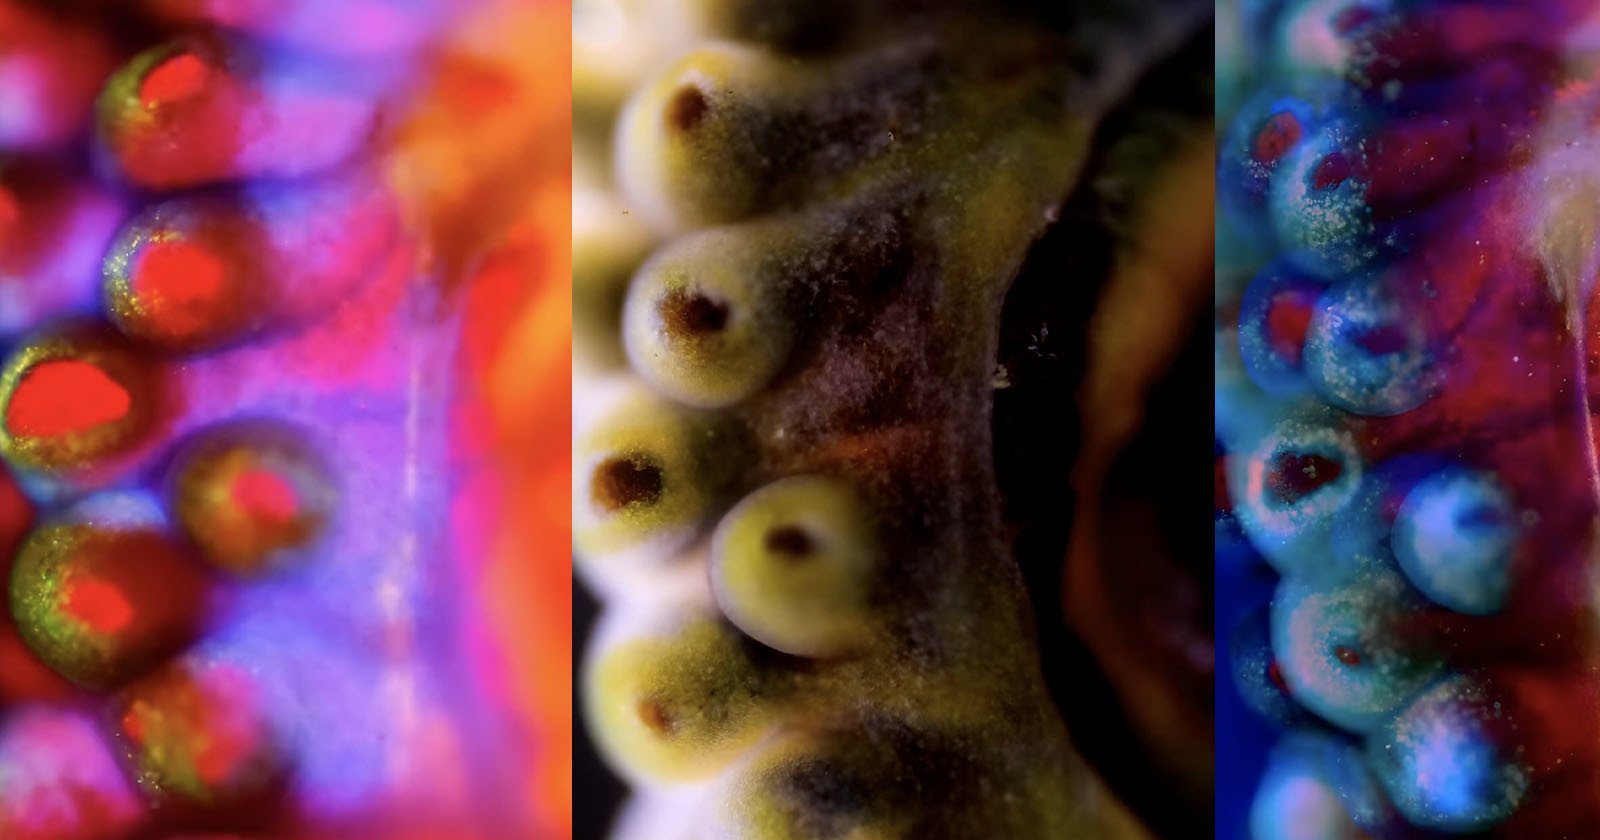  microscopic footage coral reveals colorful symbiotic relationship 